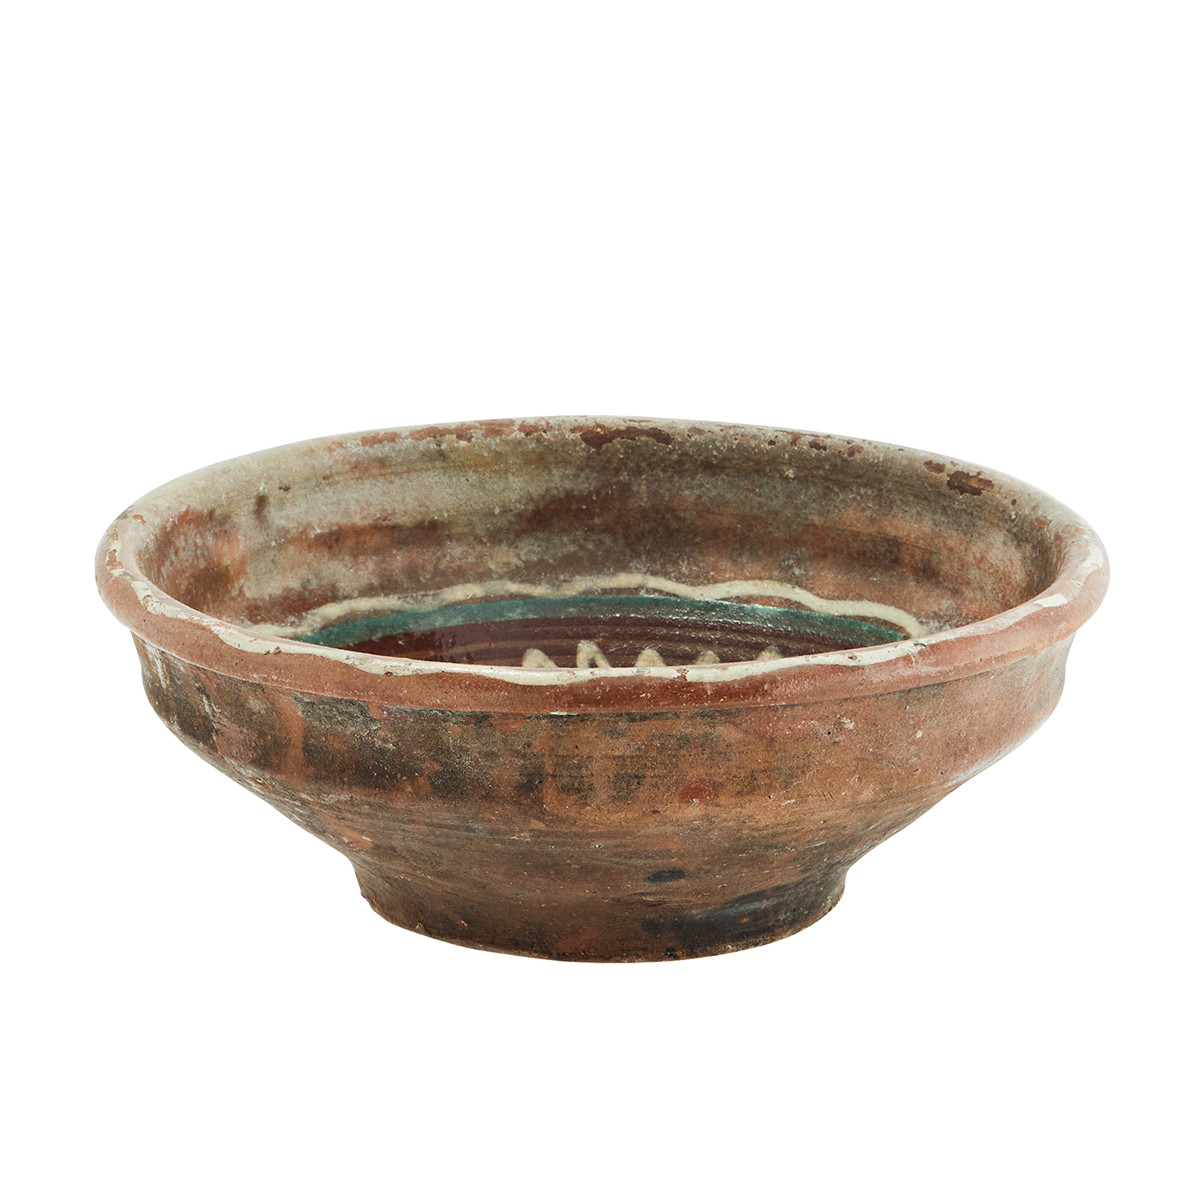 Re-used earthenware bowl